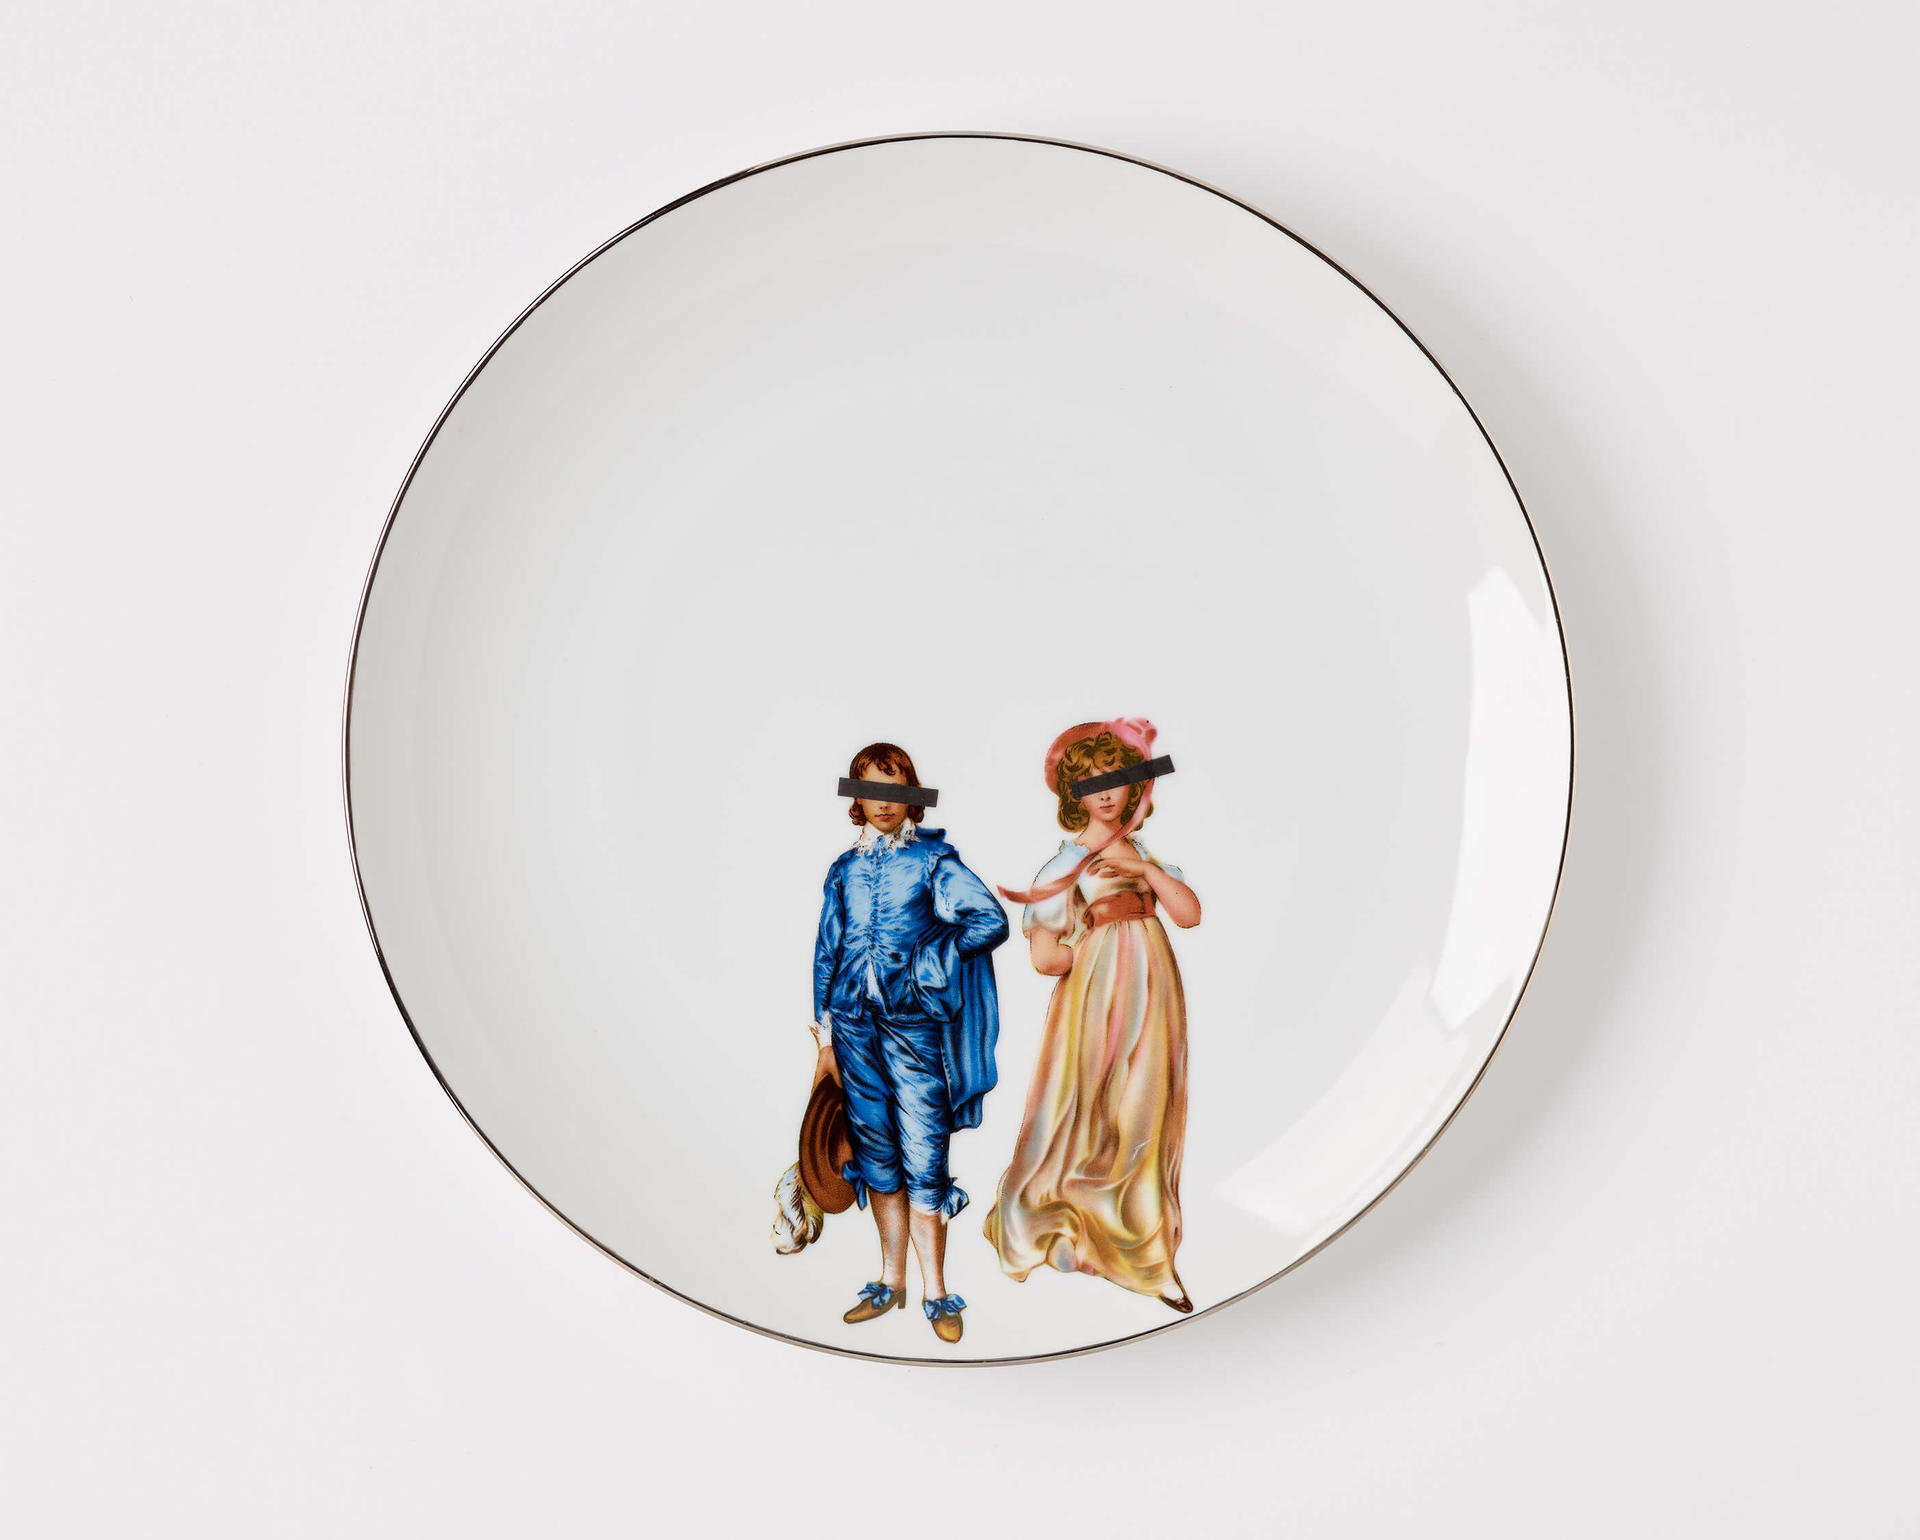 A white ceramic plate with an illustration of a Victorian-style man and woman with black bars covering their eyes